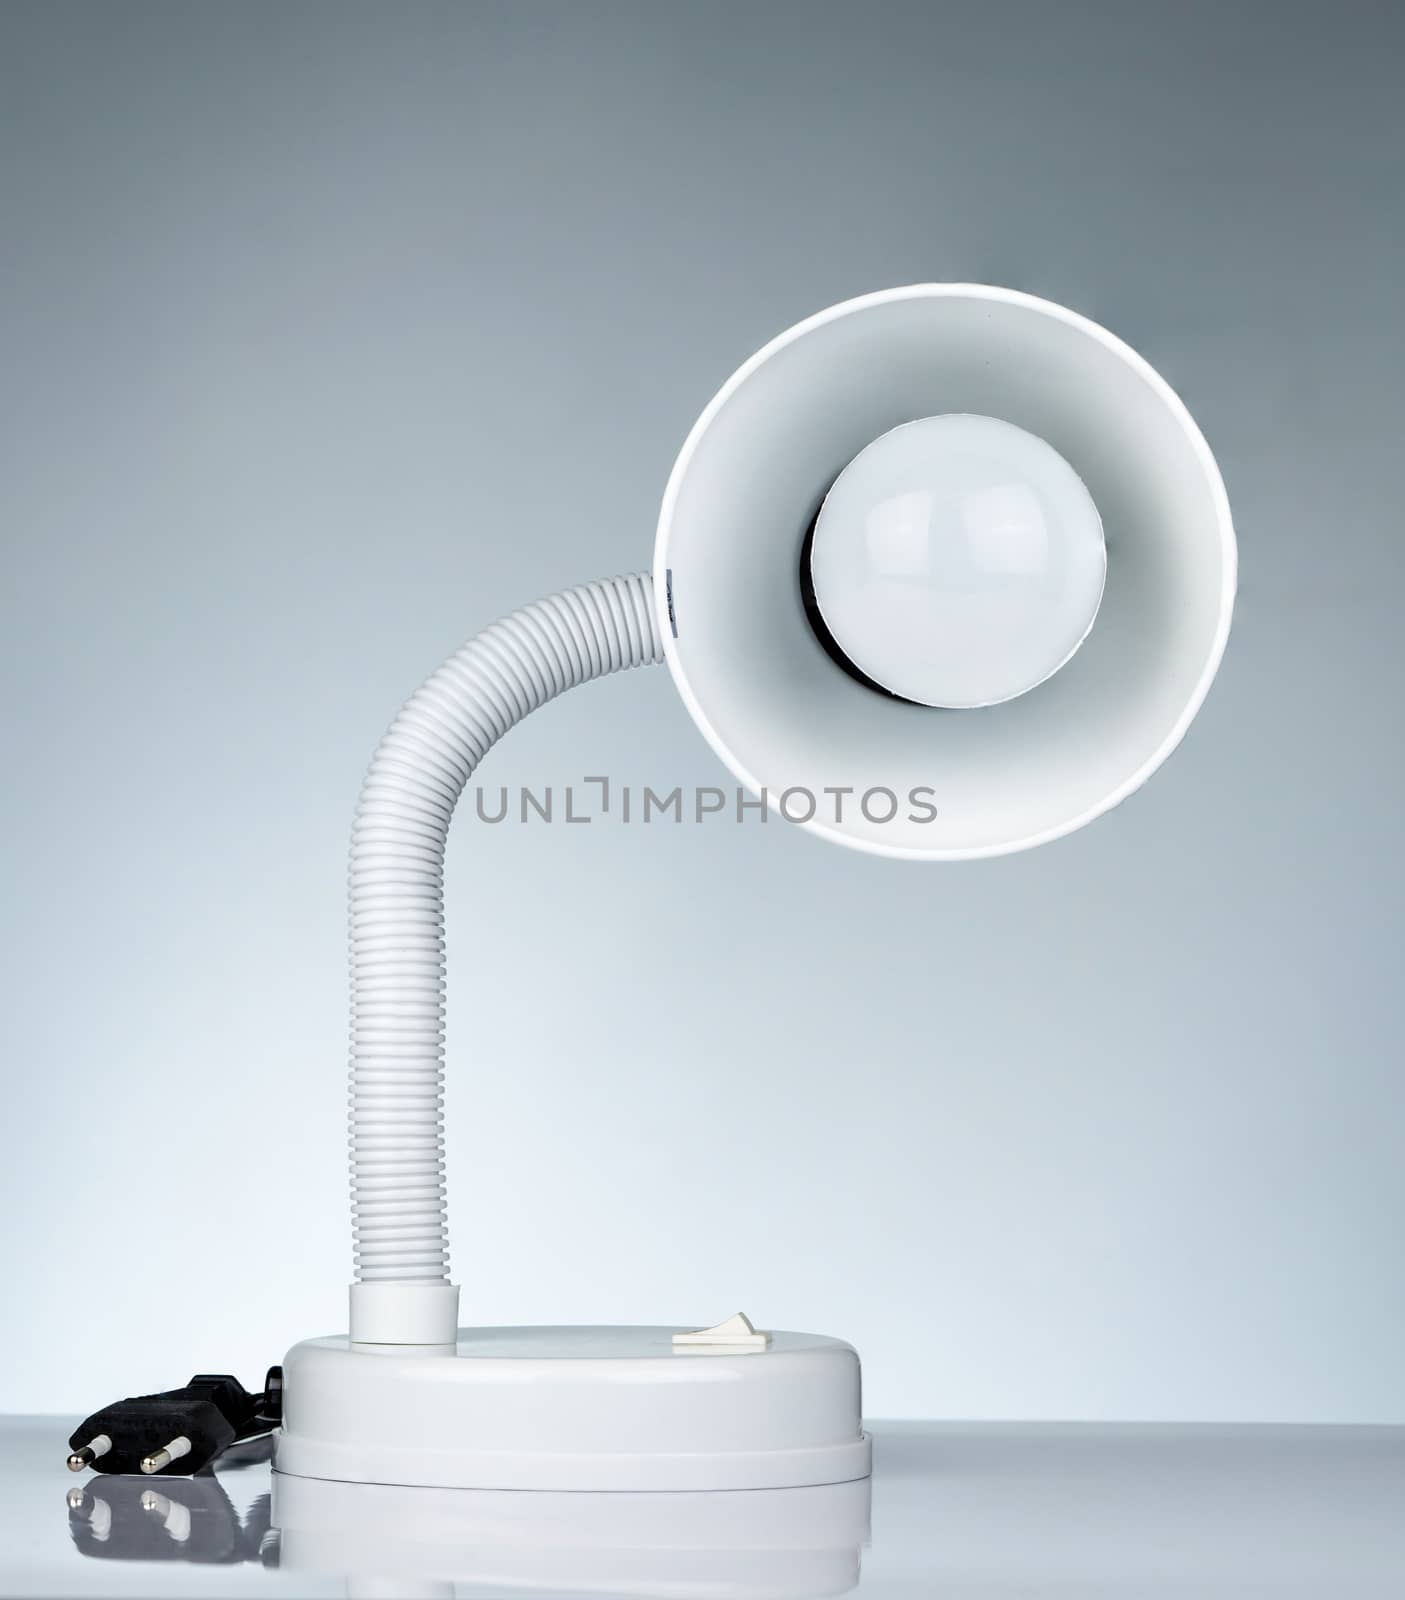 White modern table lamp isolated on white table on gradient background. Desk lamp for reading a book in dormitory room. Home and office furniture with minimalist design. Desk spotlight.